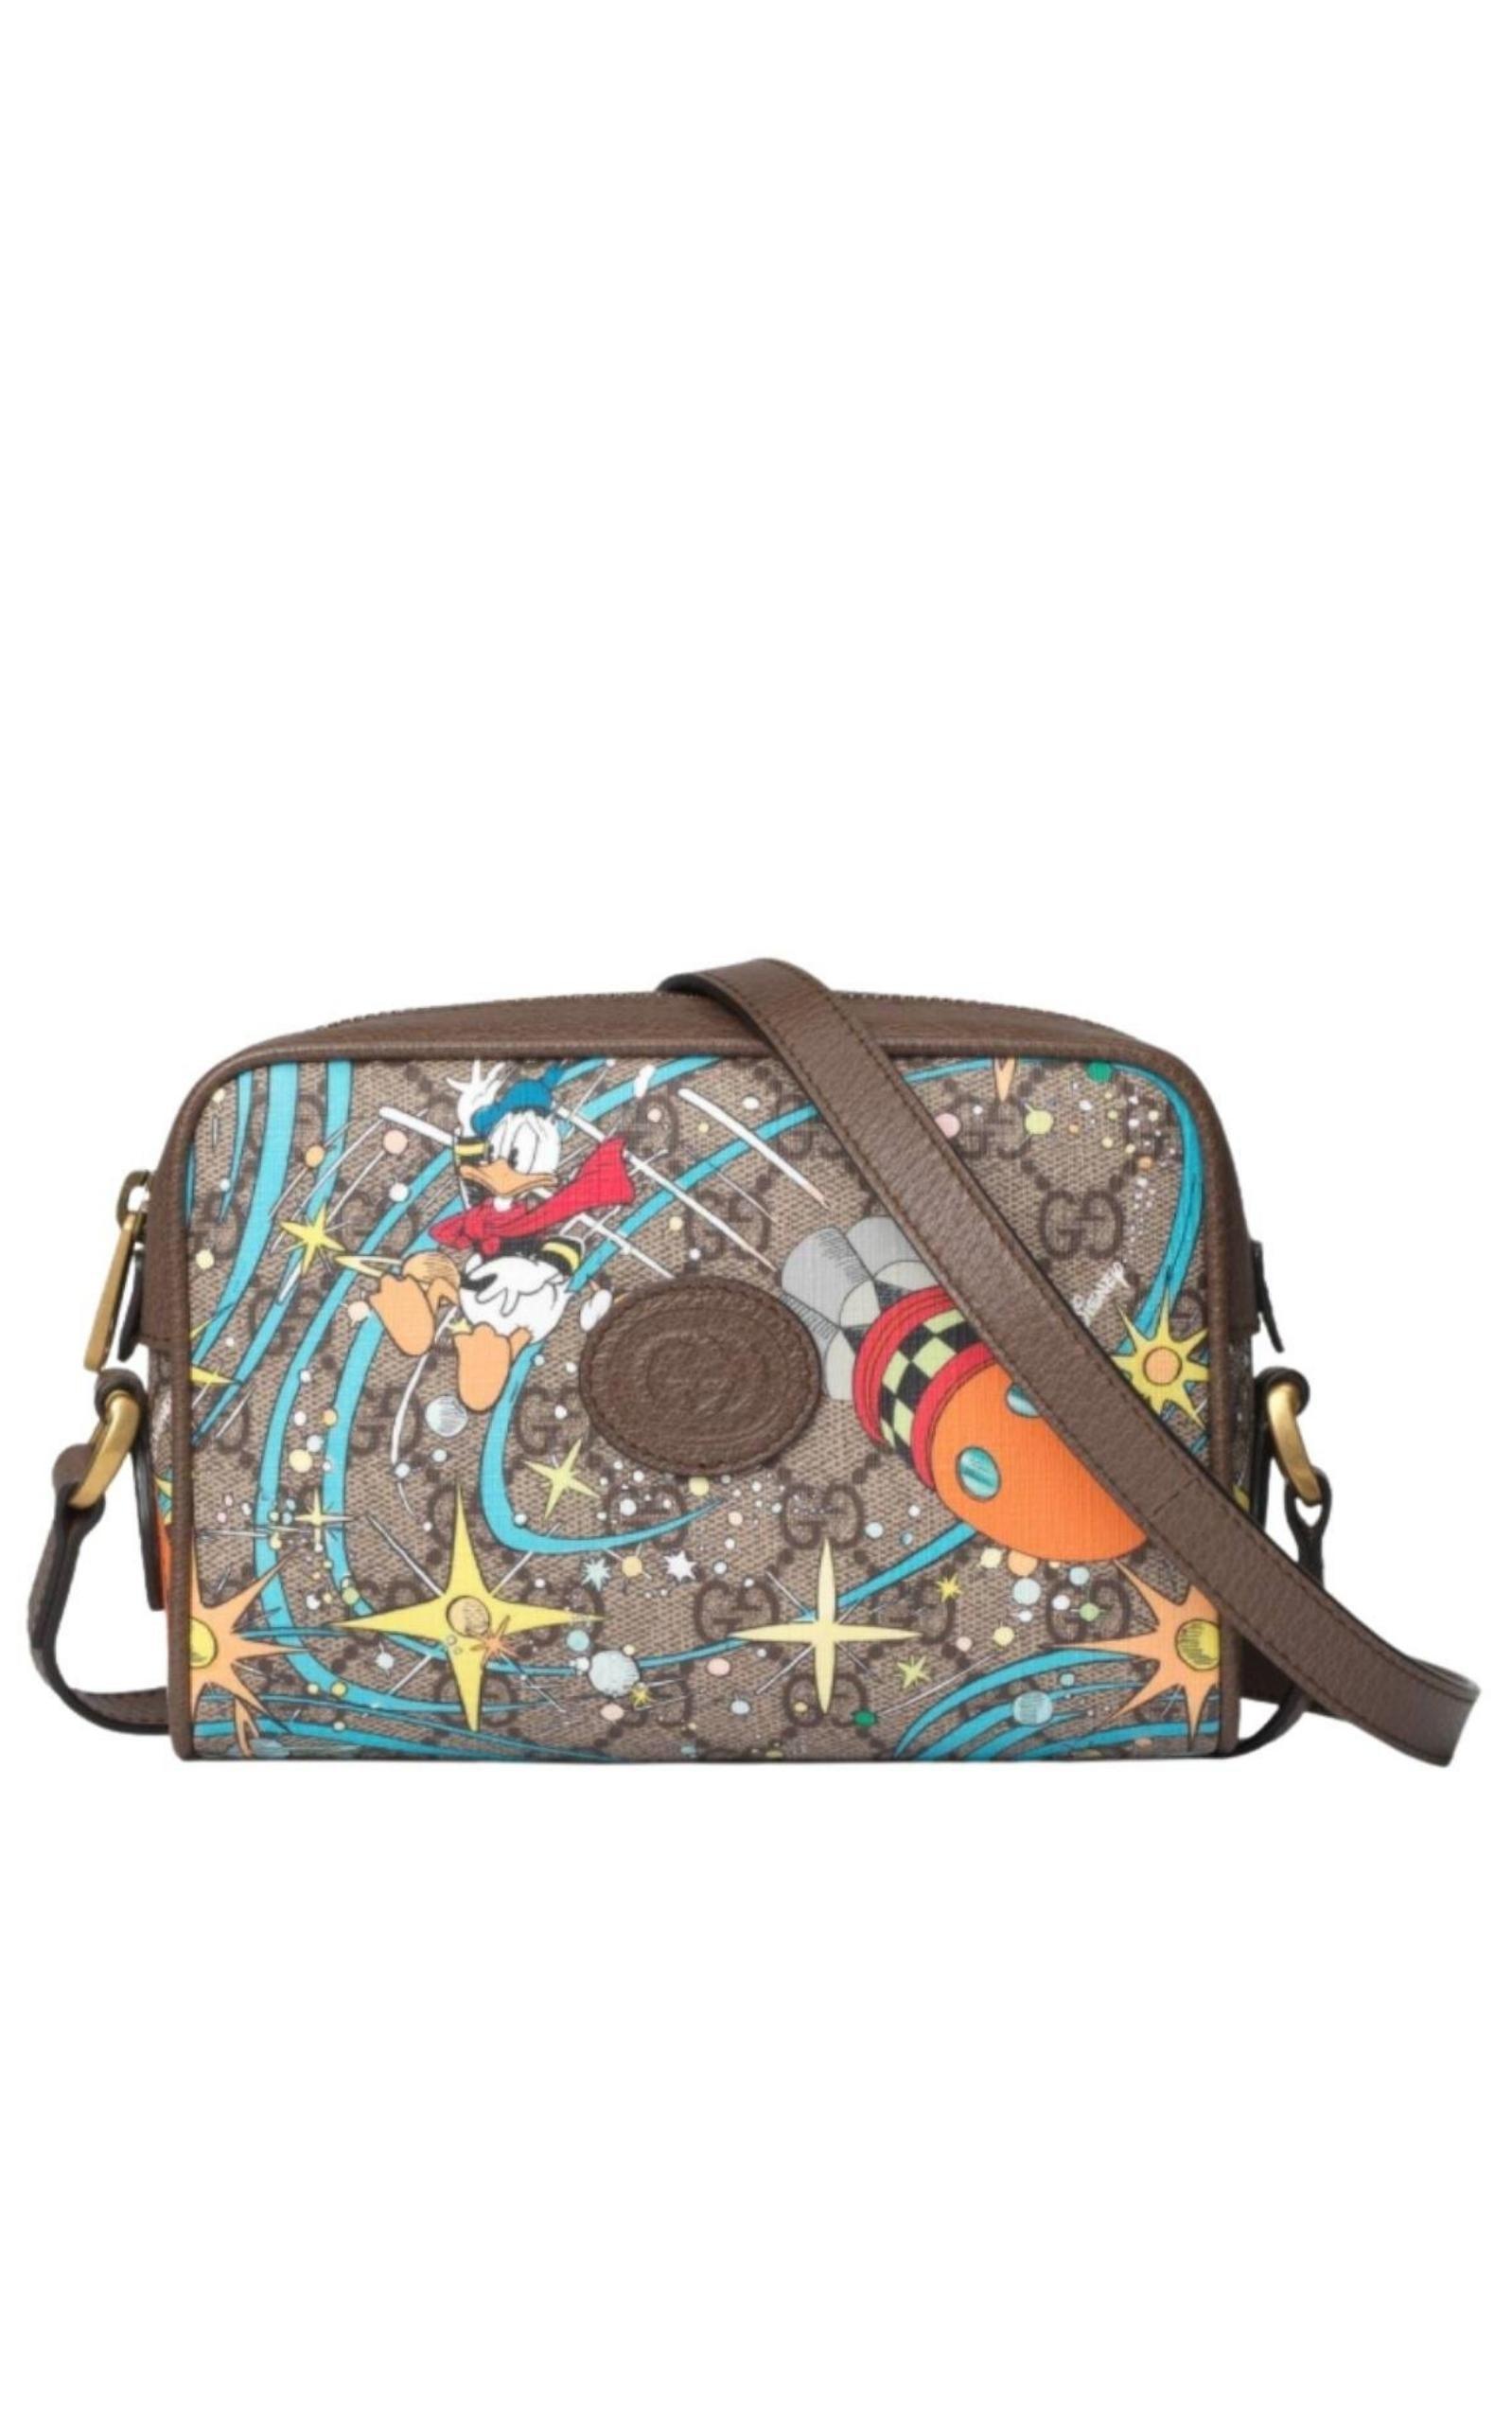 Gucci X Disney Mickey Mouse-print Tote in Brown for Men